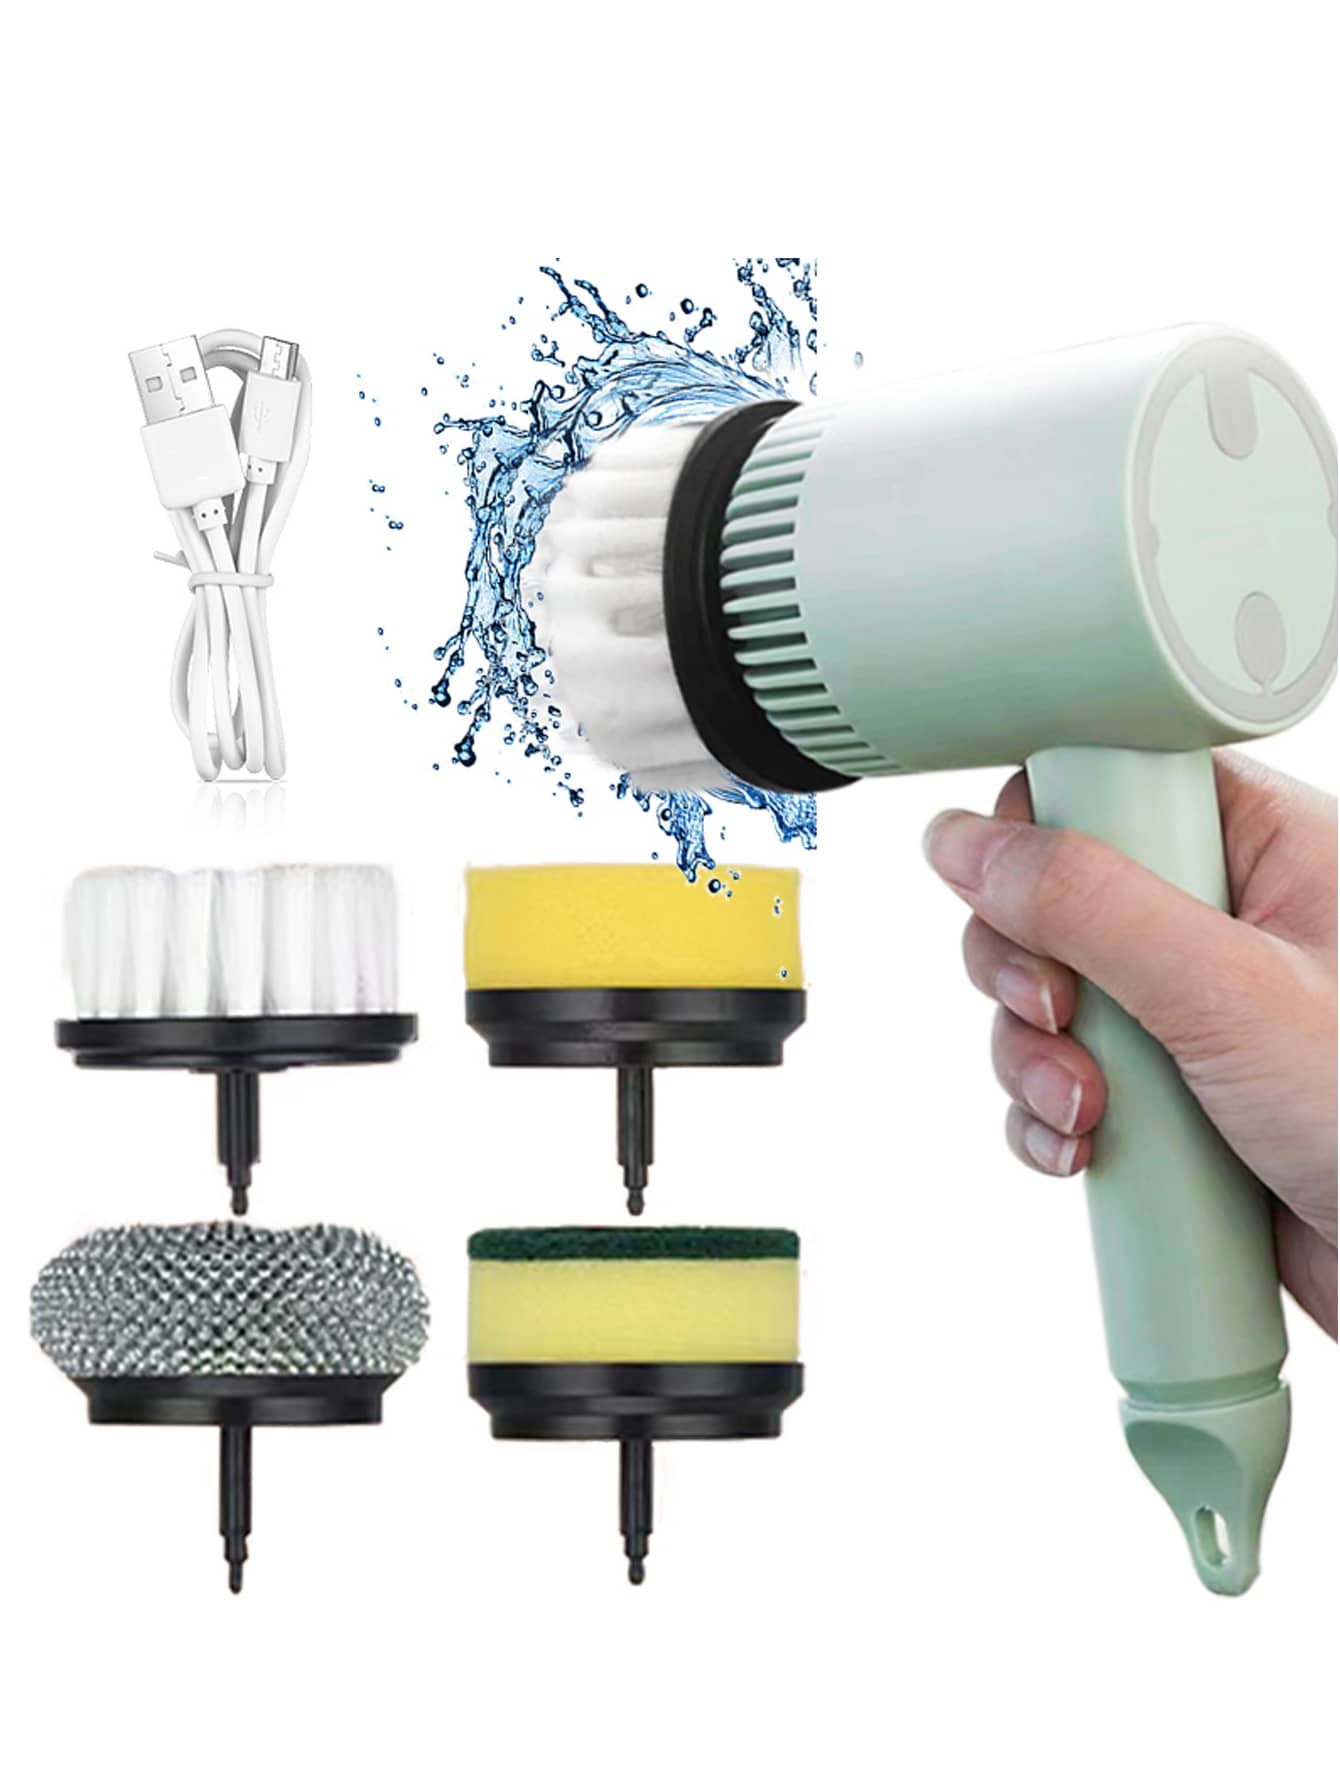 Rechargeable Electric Rotary Scrubber, With 4 Replaceable Cleaning Heads, Power Shower Scrubber For Bathroom Floor Tile Car Tub-Host + 4 brush heads + green-1